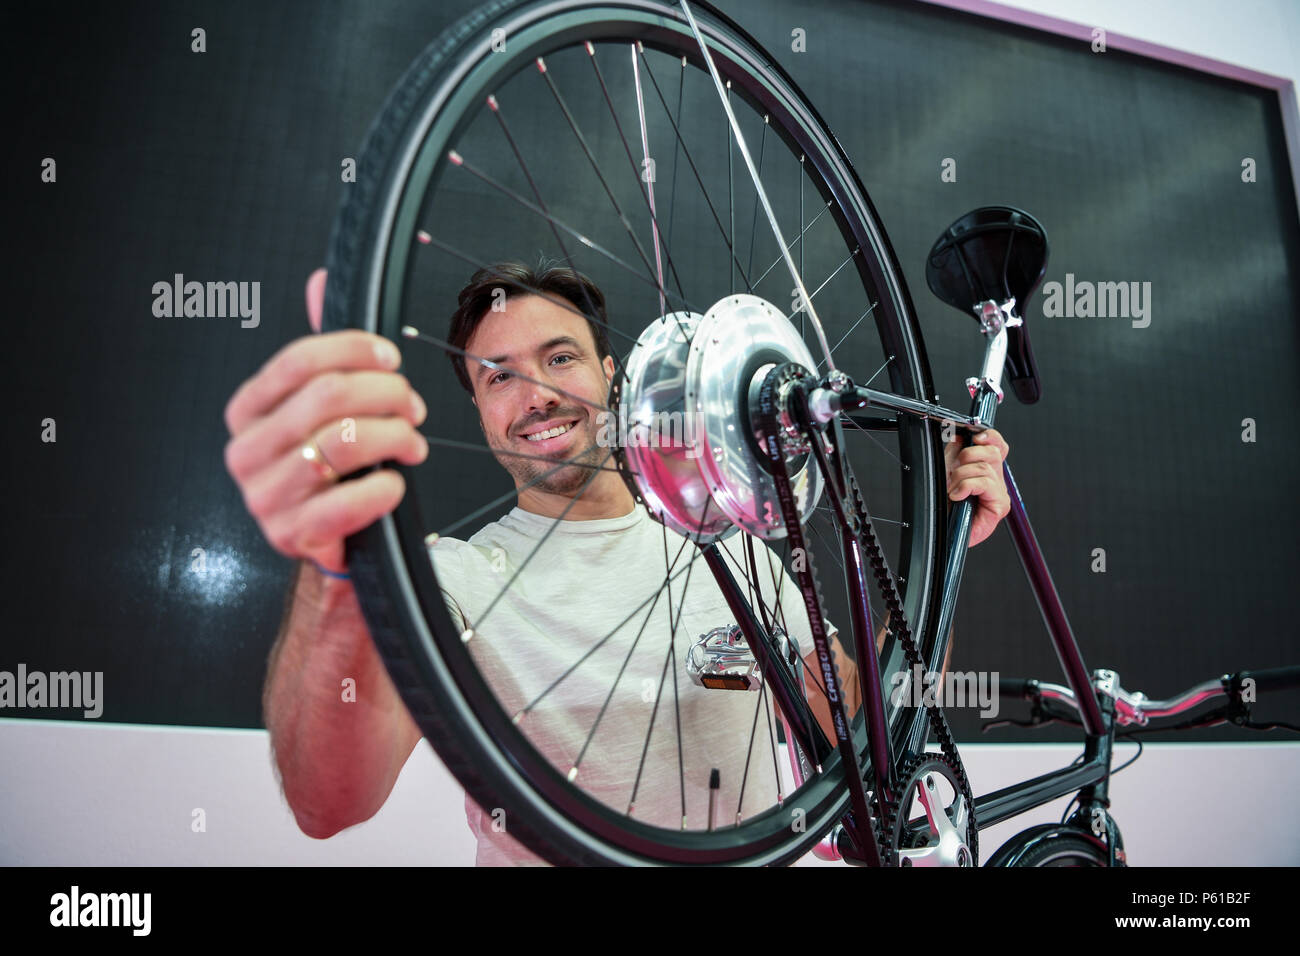 28 June 2018, Germany, Friedrichshafen: The model Thomas holds up a  Prototype Cooper E Disc during a press conference, a week before the start  of the bicycle fair 'Eurobike'. The bicycle has